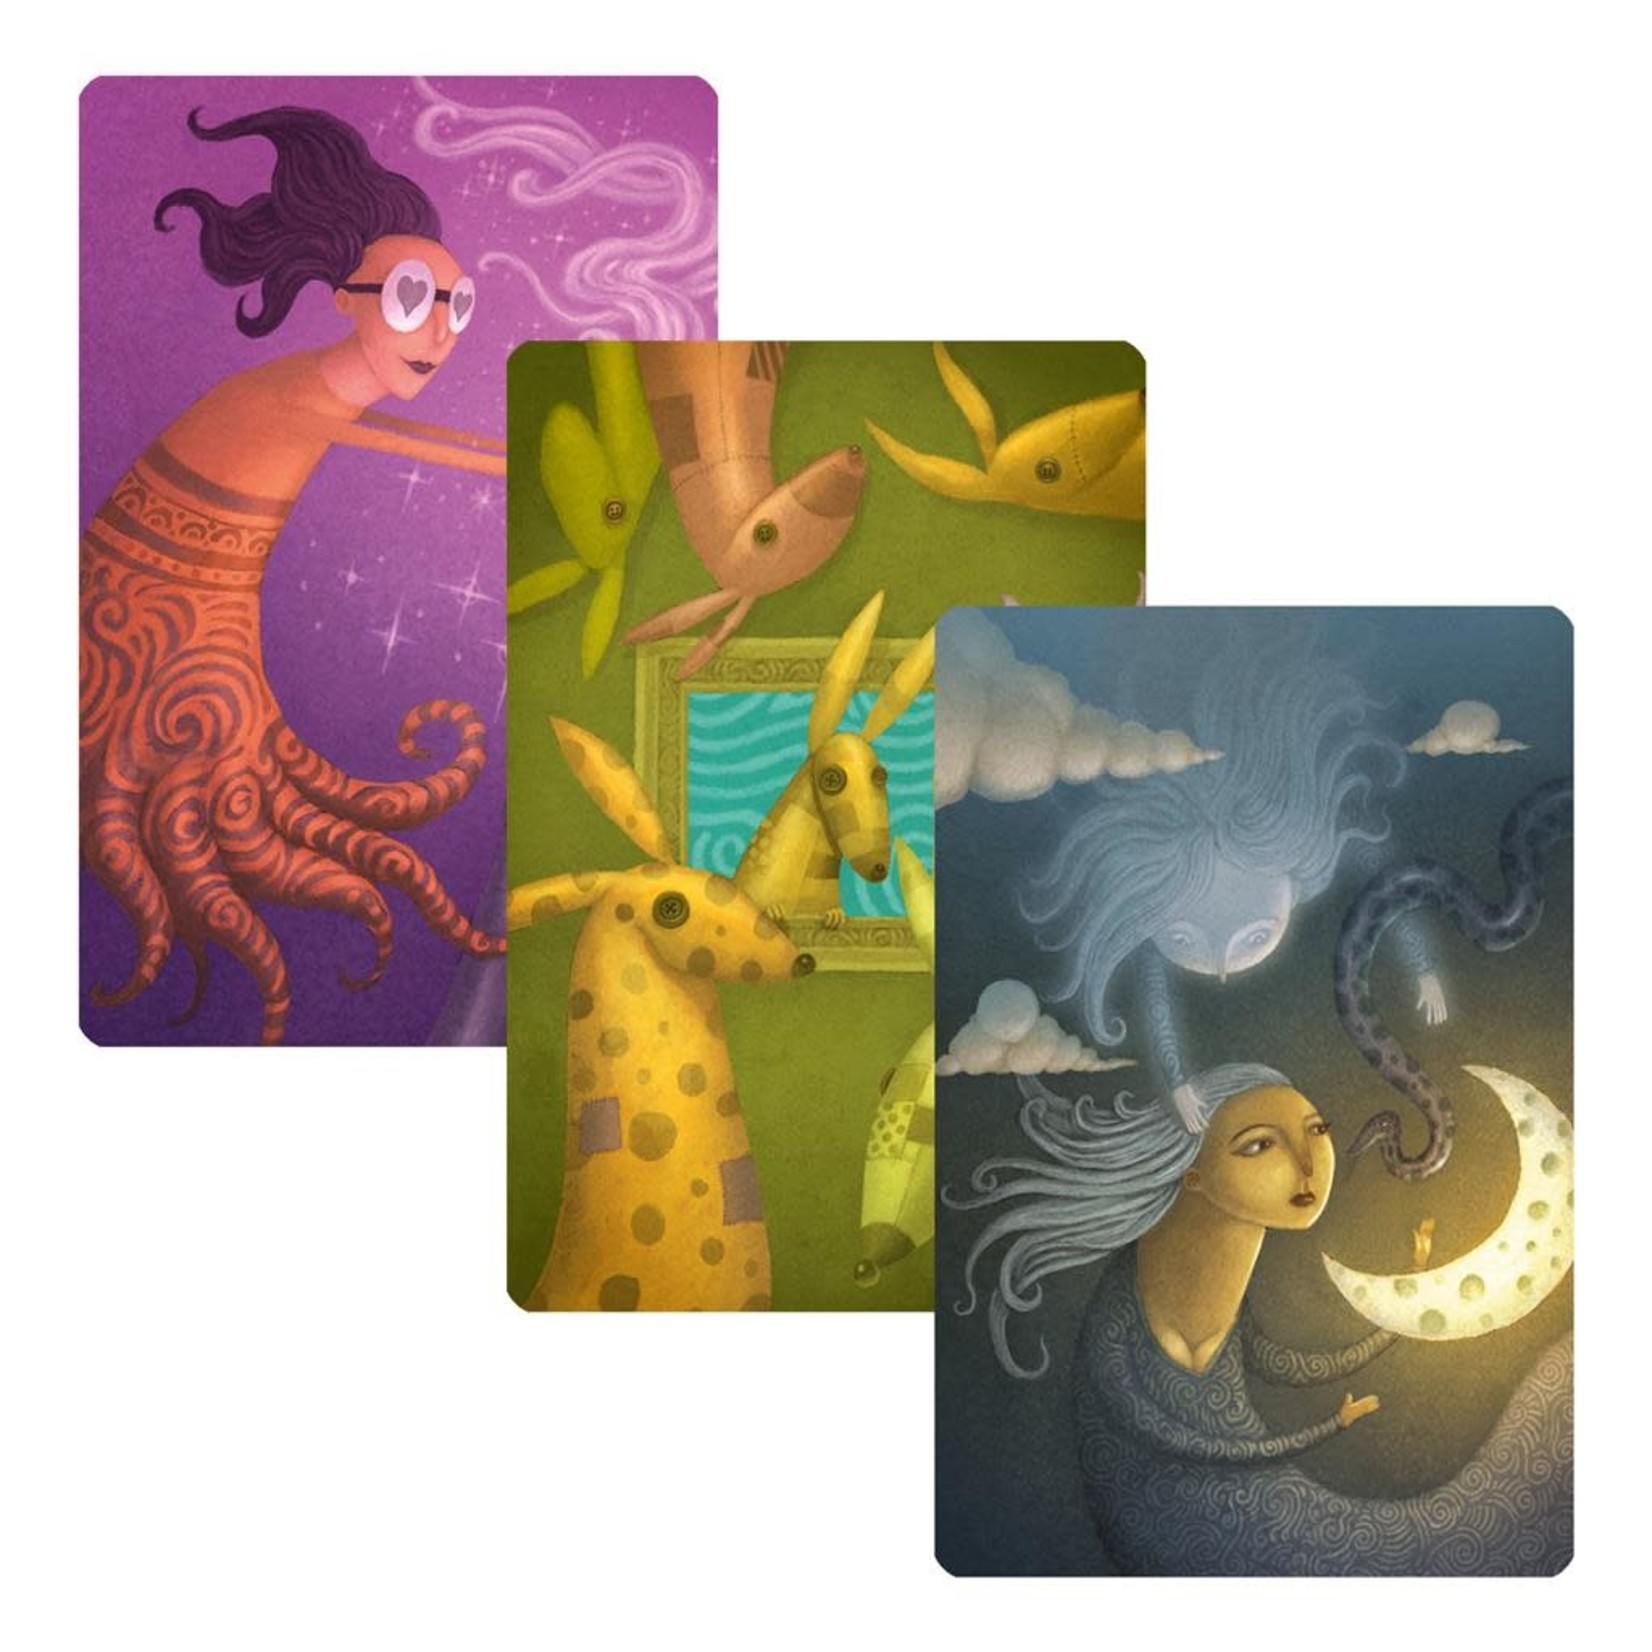 Dixit: Daydreams Expansion (8+)